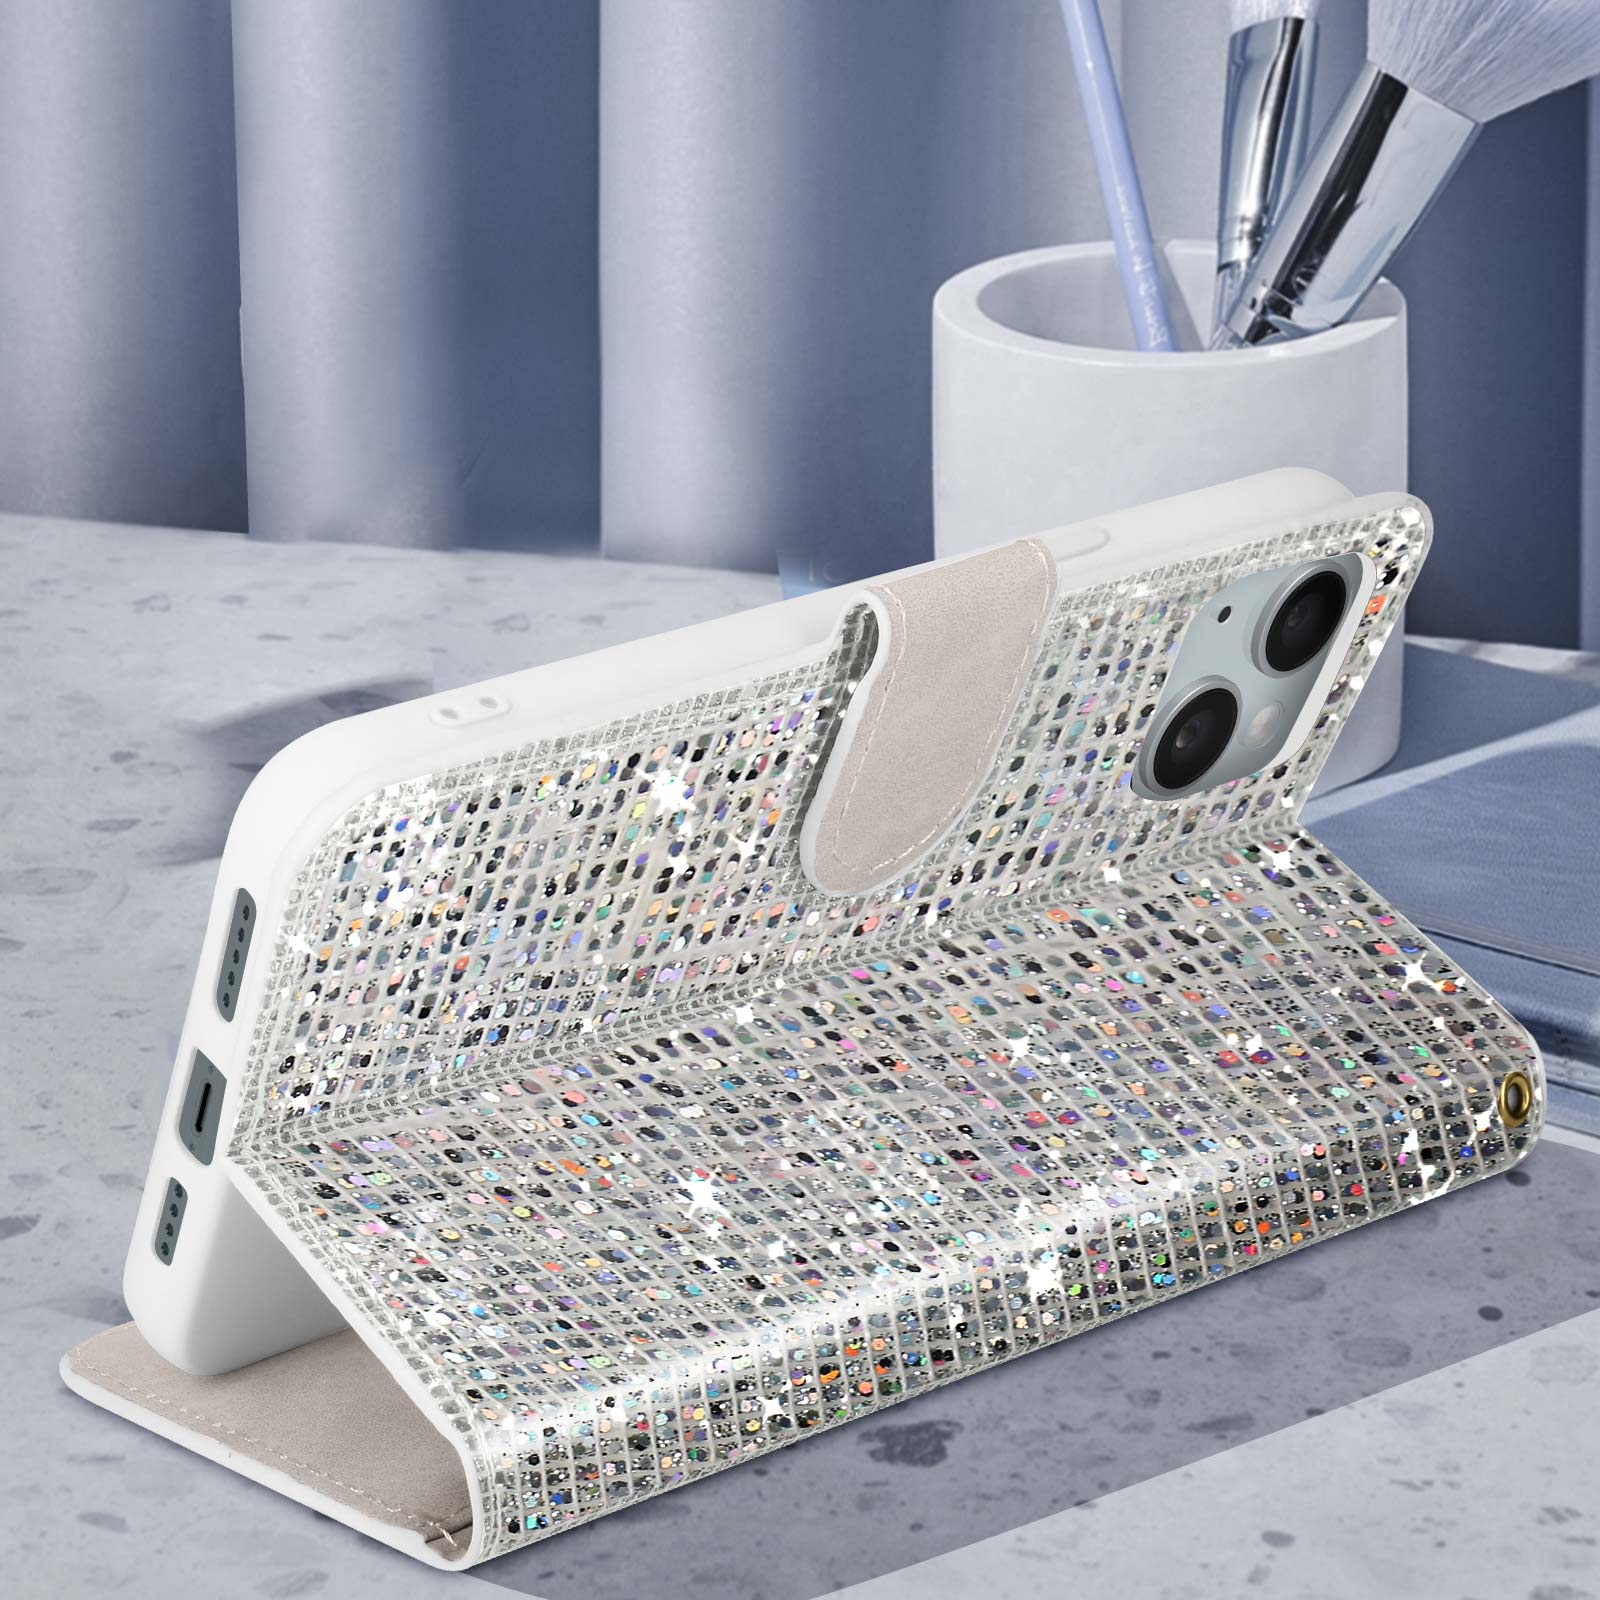 Glam Edition Silber Series, Plus, AVIZAR Disco Apple, Bookcover, 15 iPhone